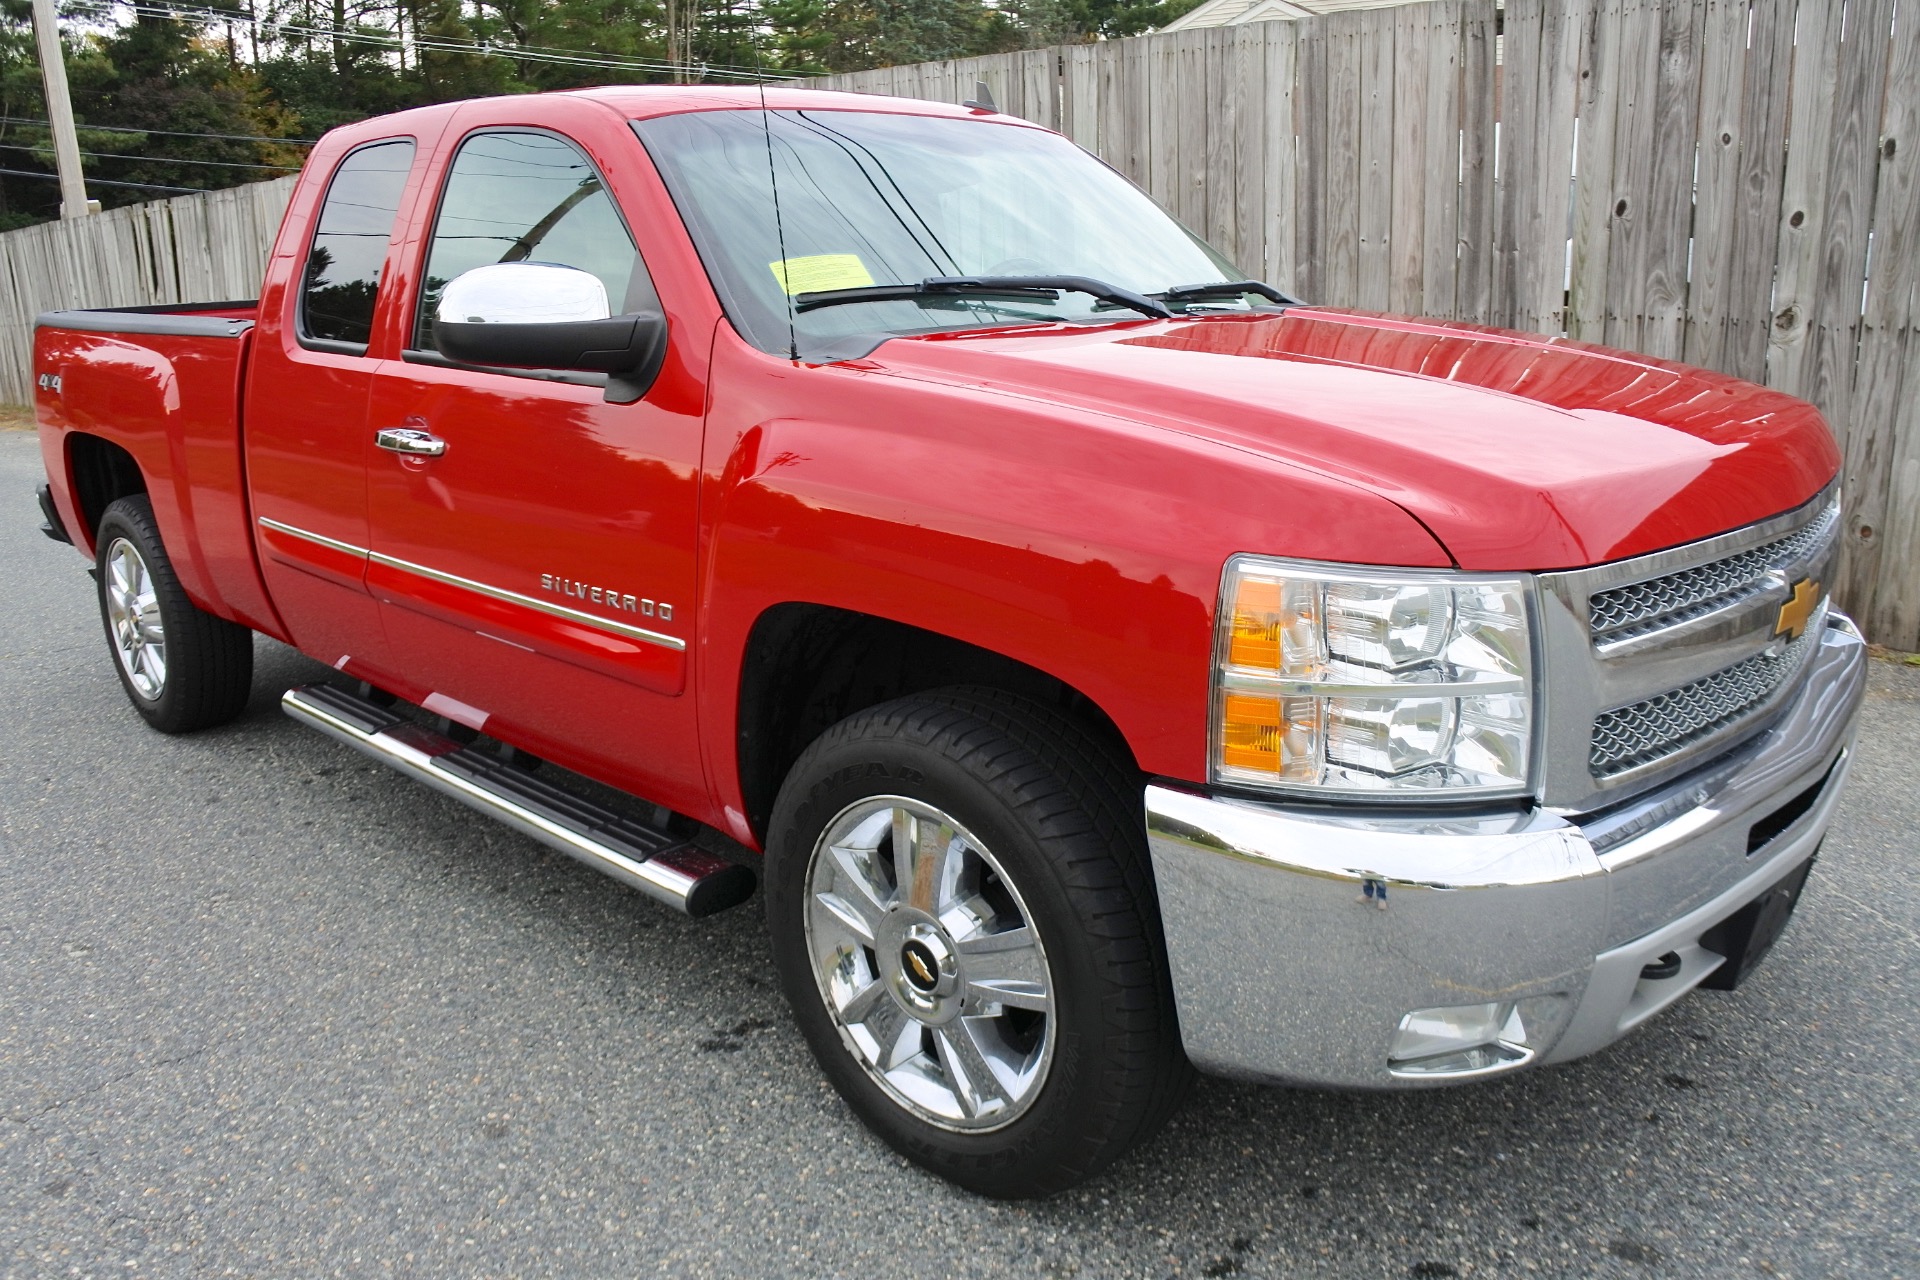 Used 2012 Chevrolet Silverado 1500 4WD Ext Cab 143.5' LT For Sale ...